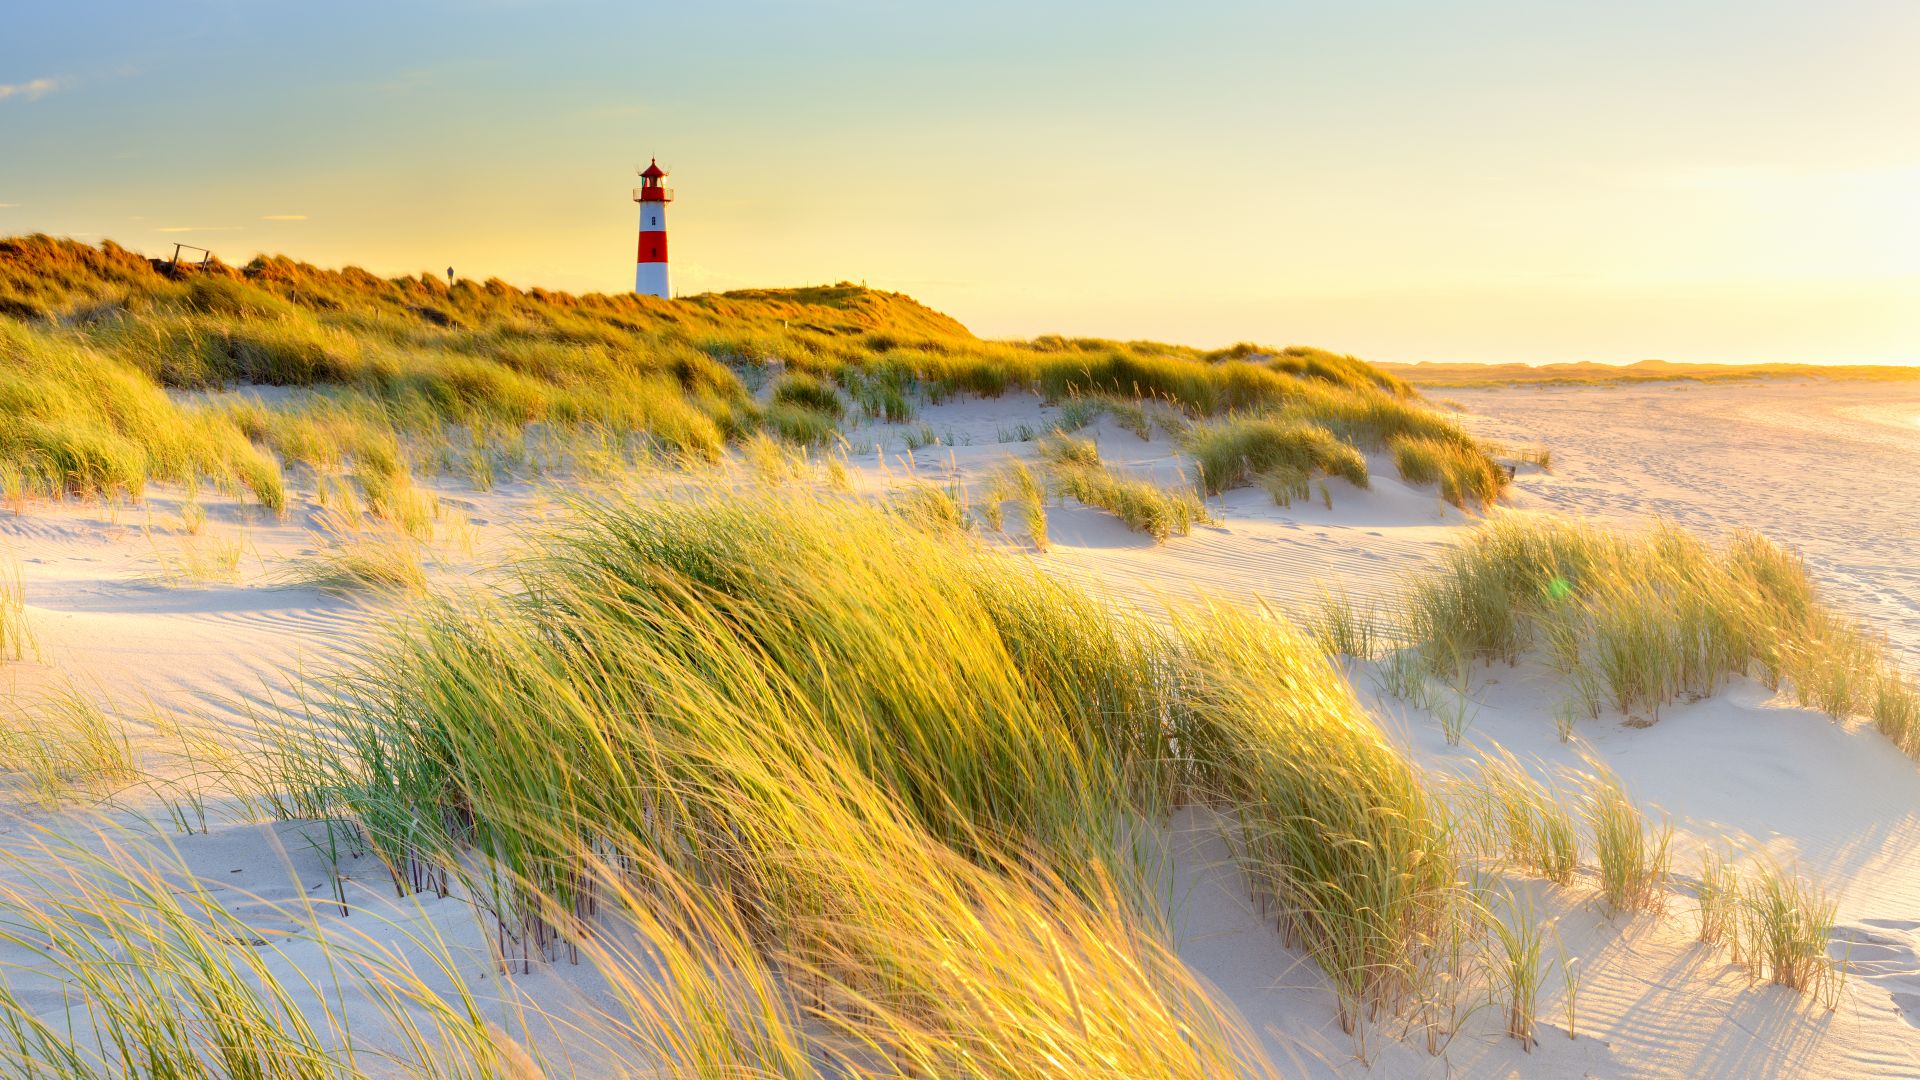 Sylt: sport, nature and fine dining in the North Sea - Germany Travel